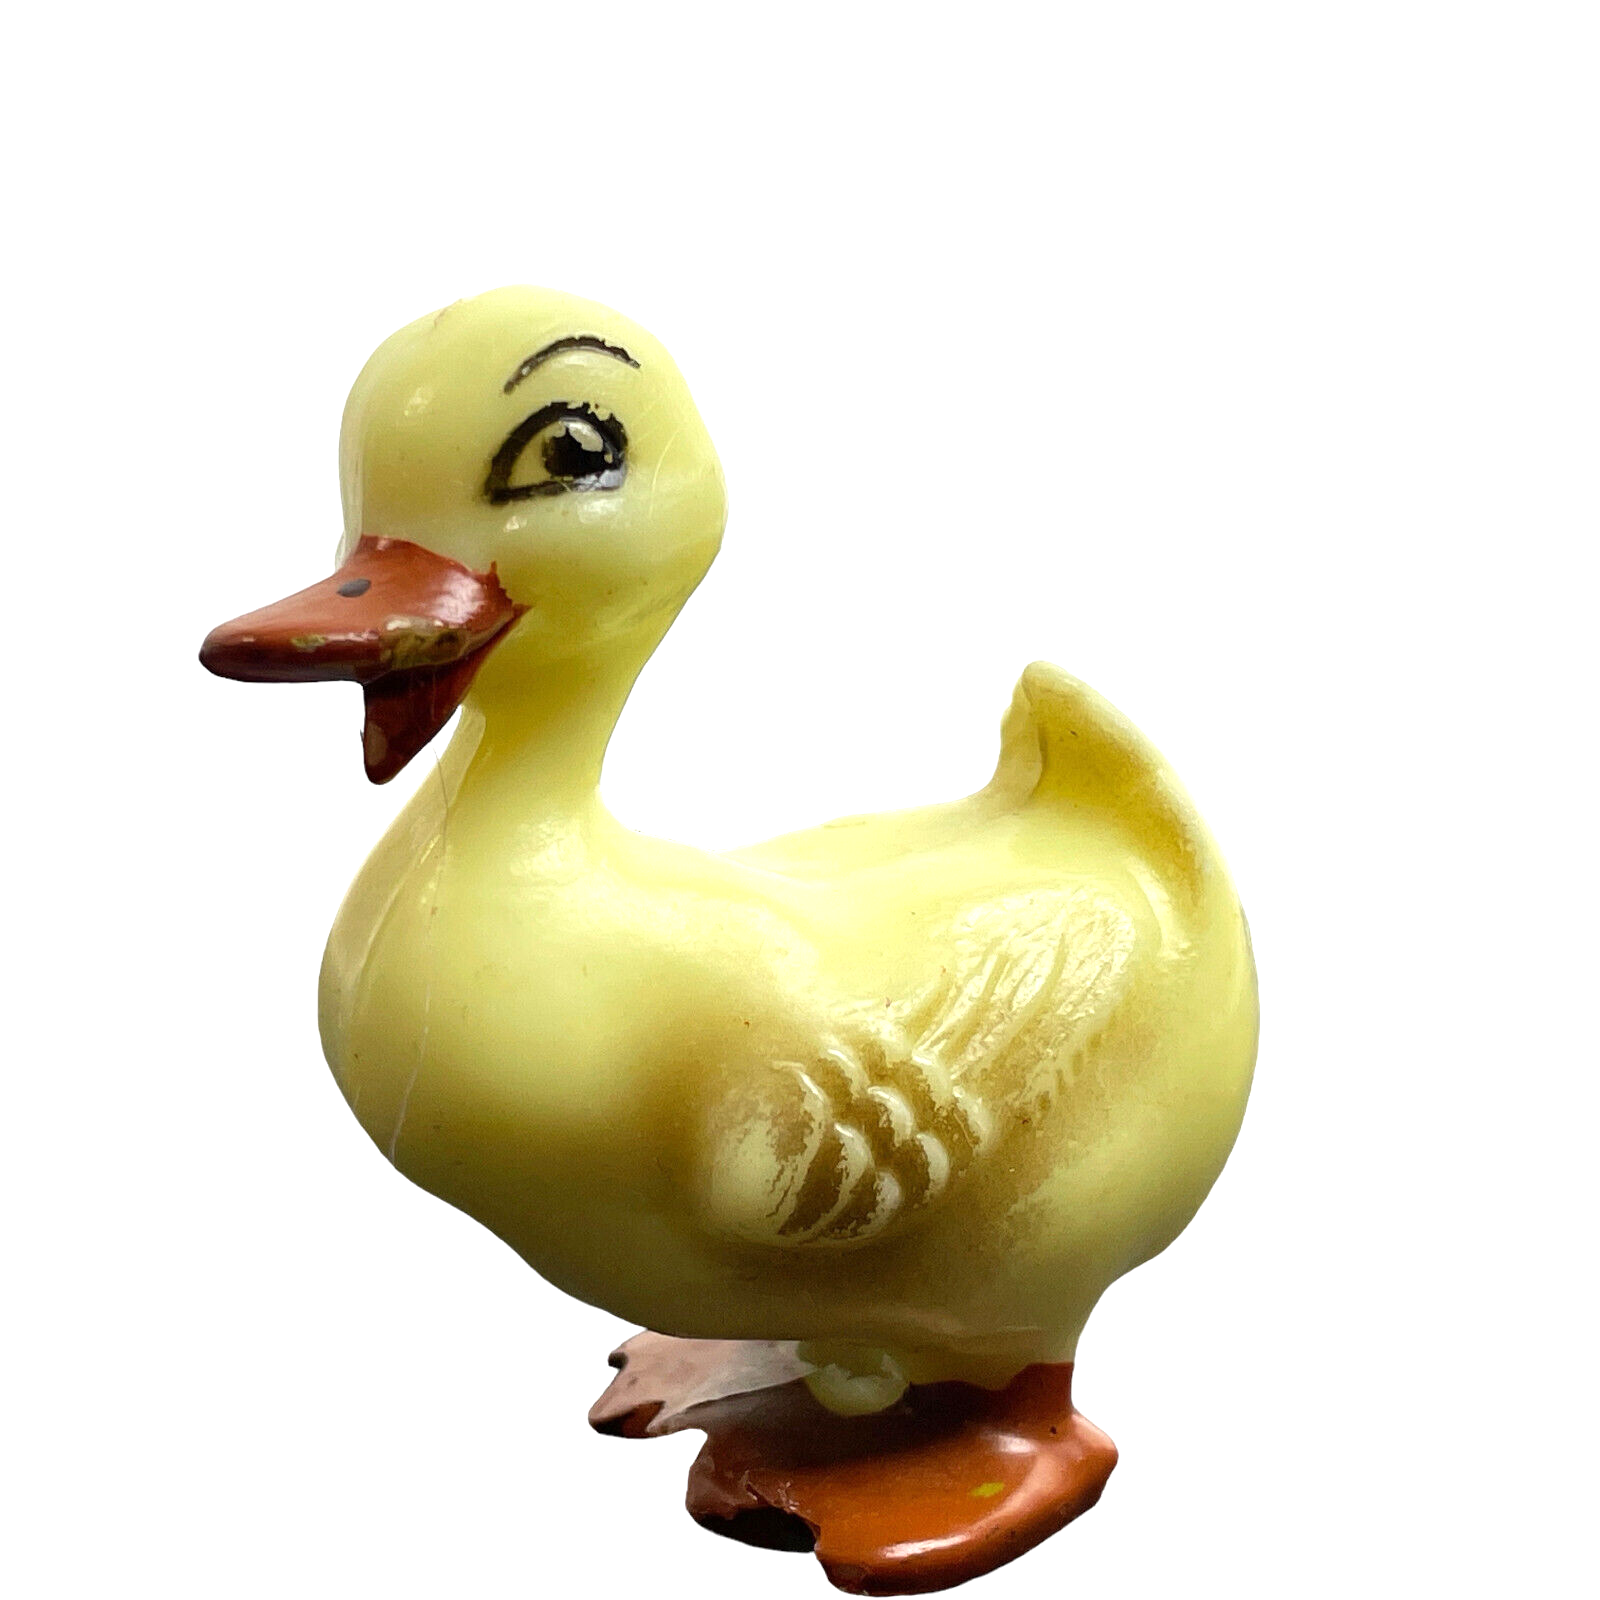 Primary image for Vintage Wilton Cupcake Topper Plastic Yellow 2" Duck